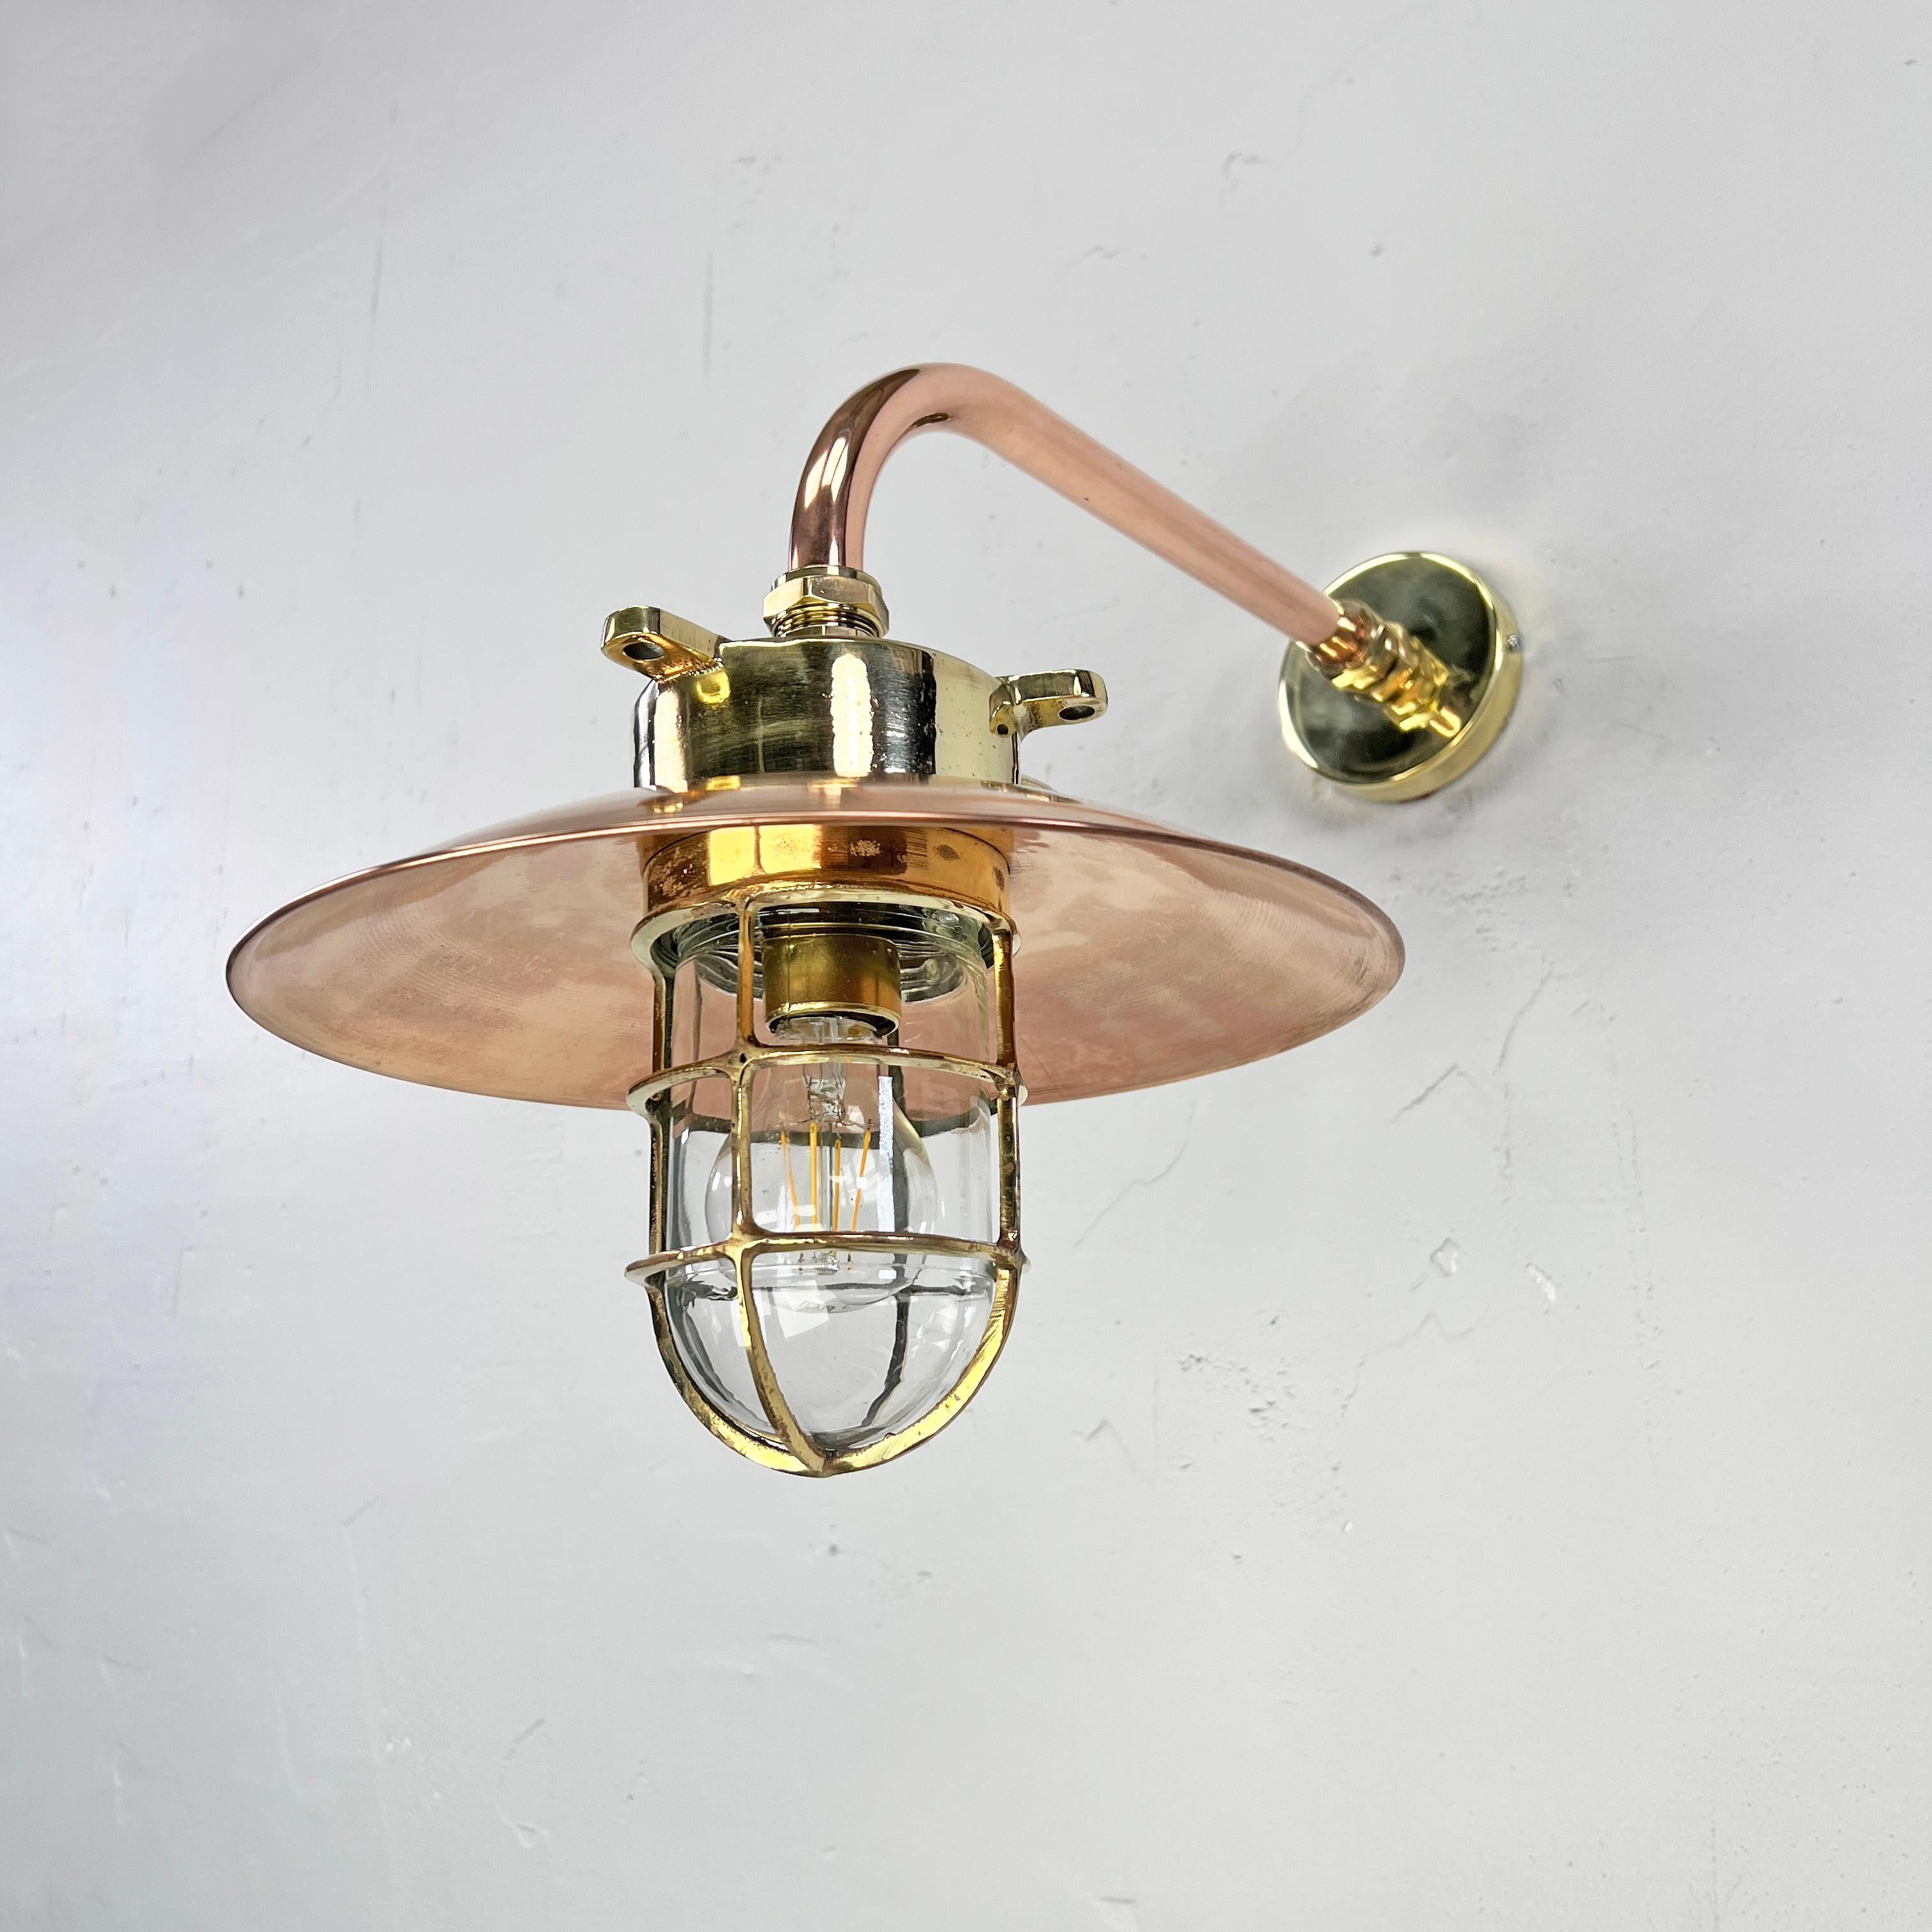 1970s Japanese Cast Brass and Copper Explosion Proof Caged Cantilever Wall Light For Sale 5